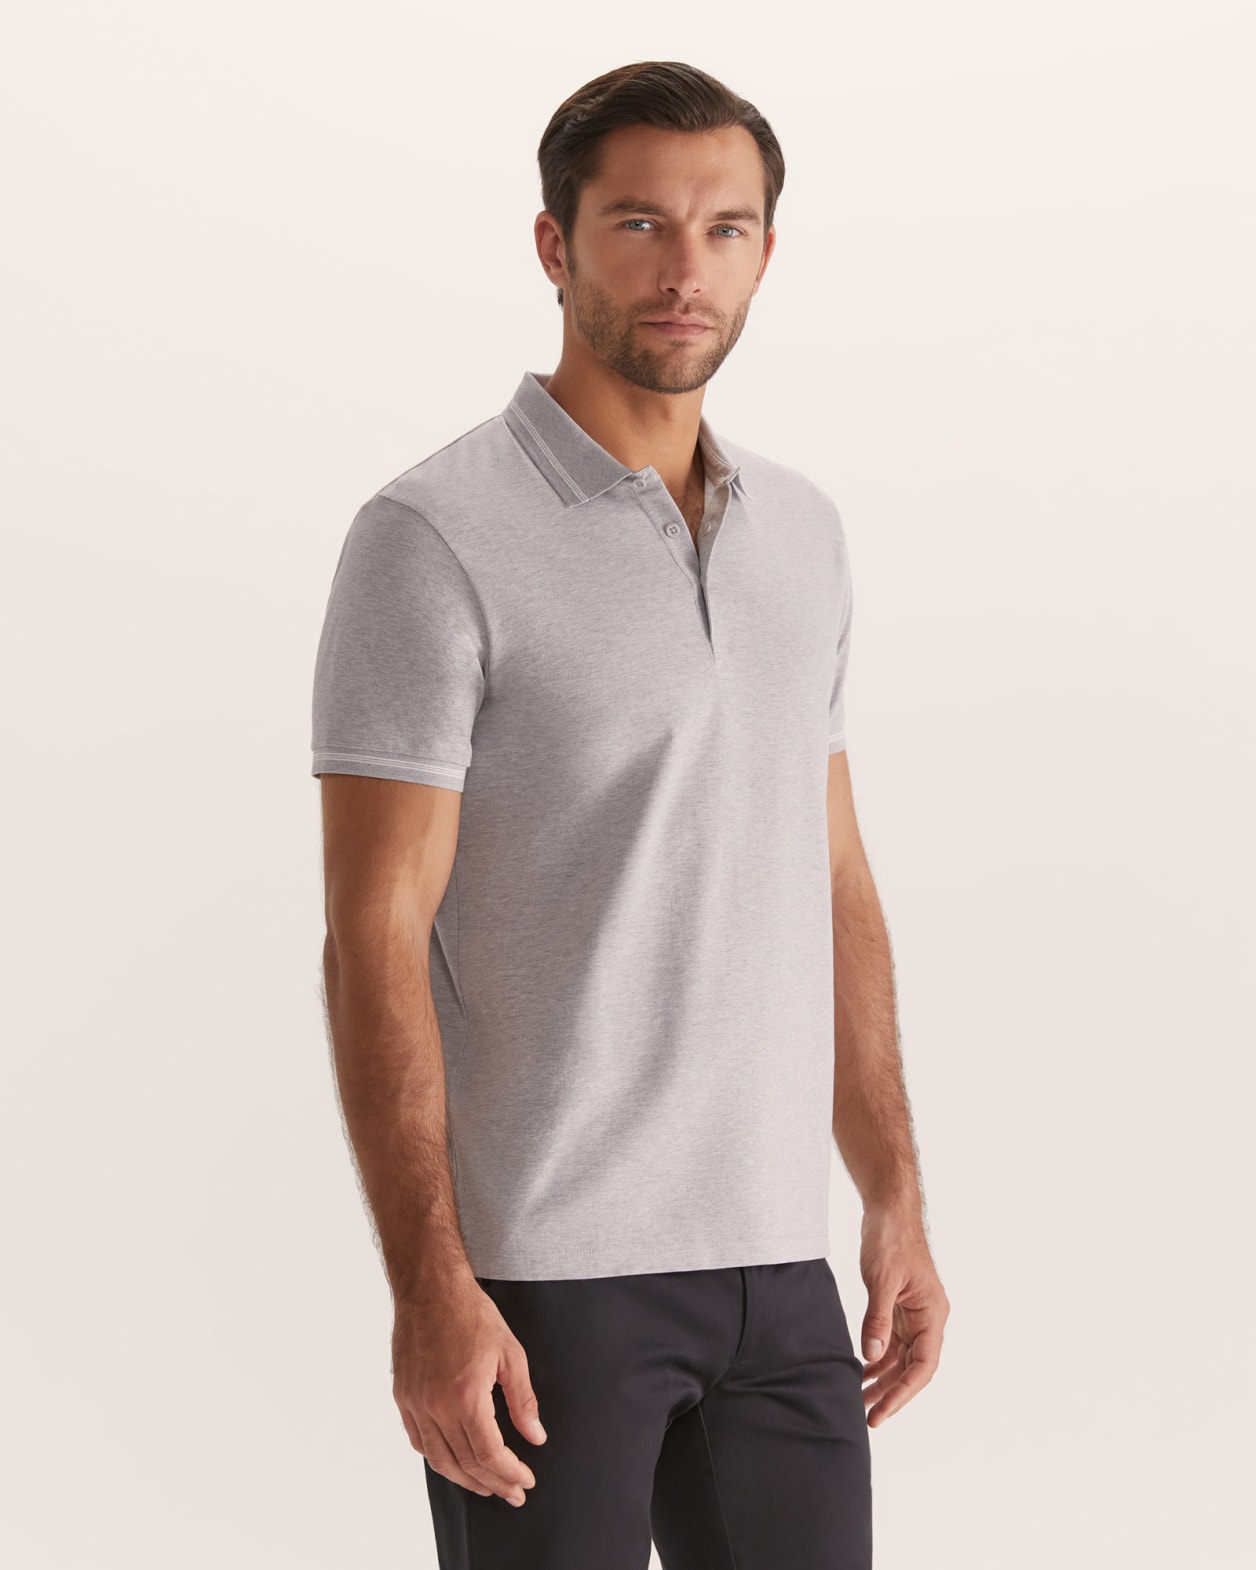 Andy Tipped Polo in GREY